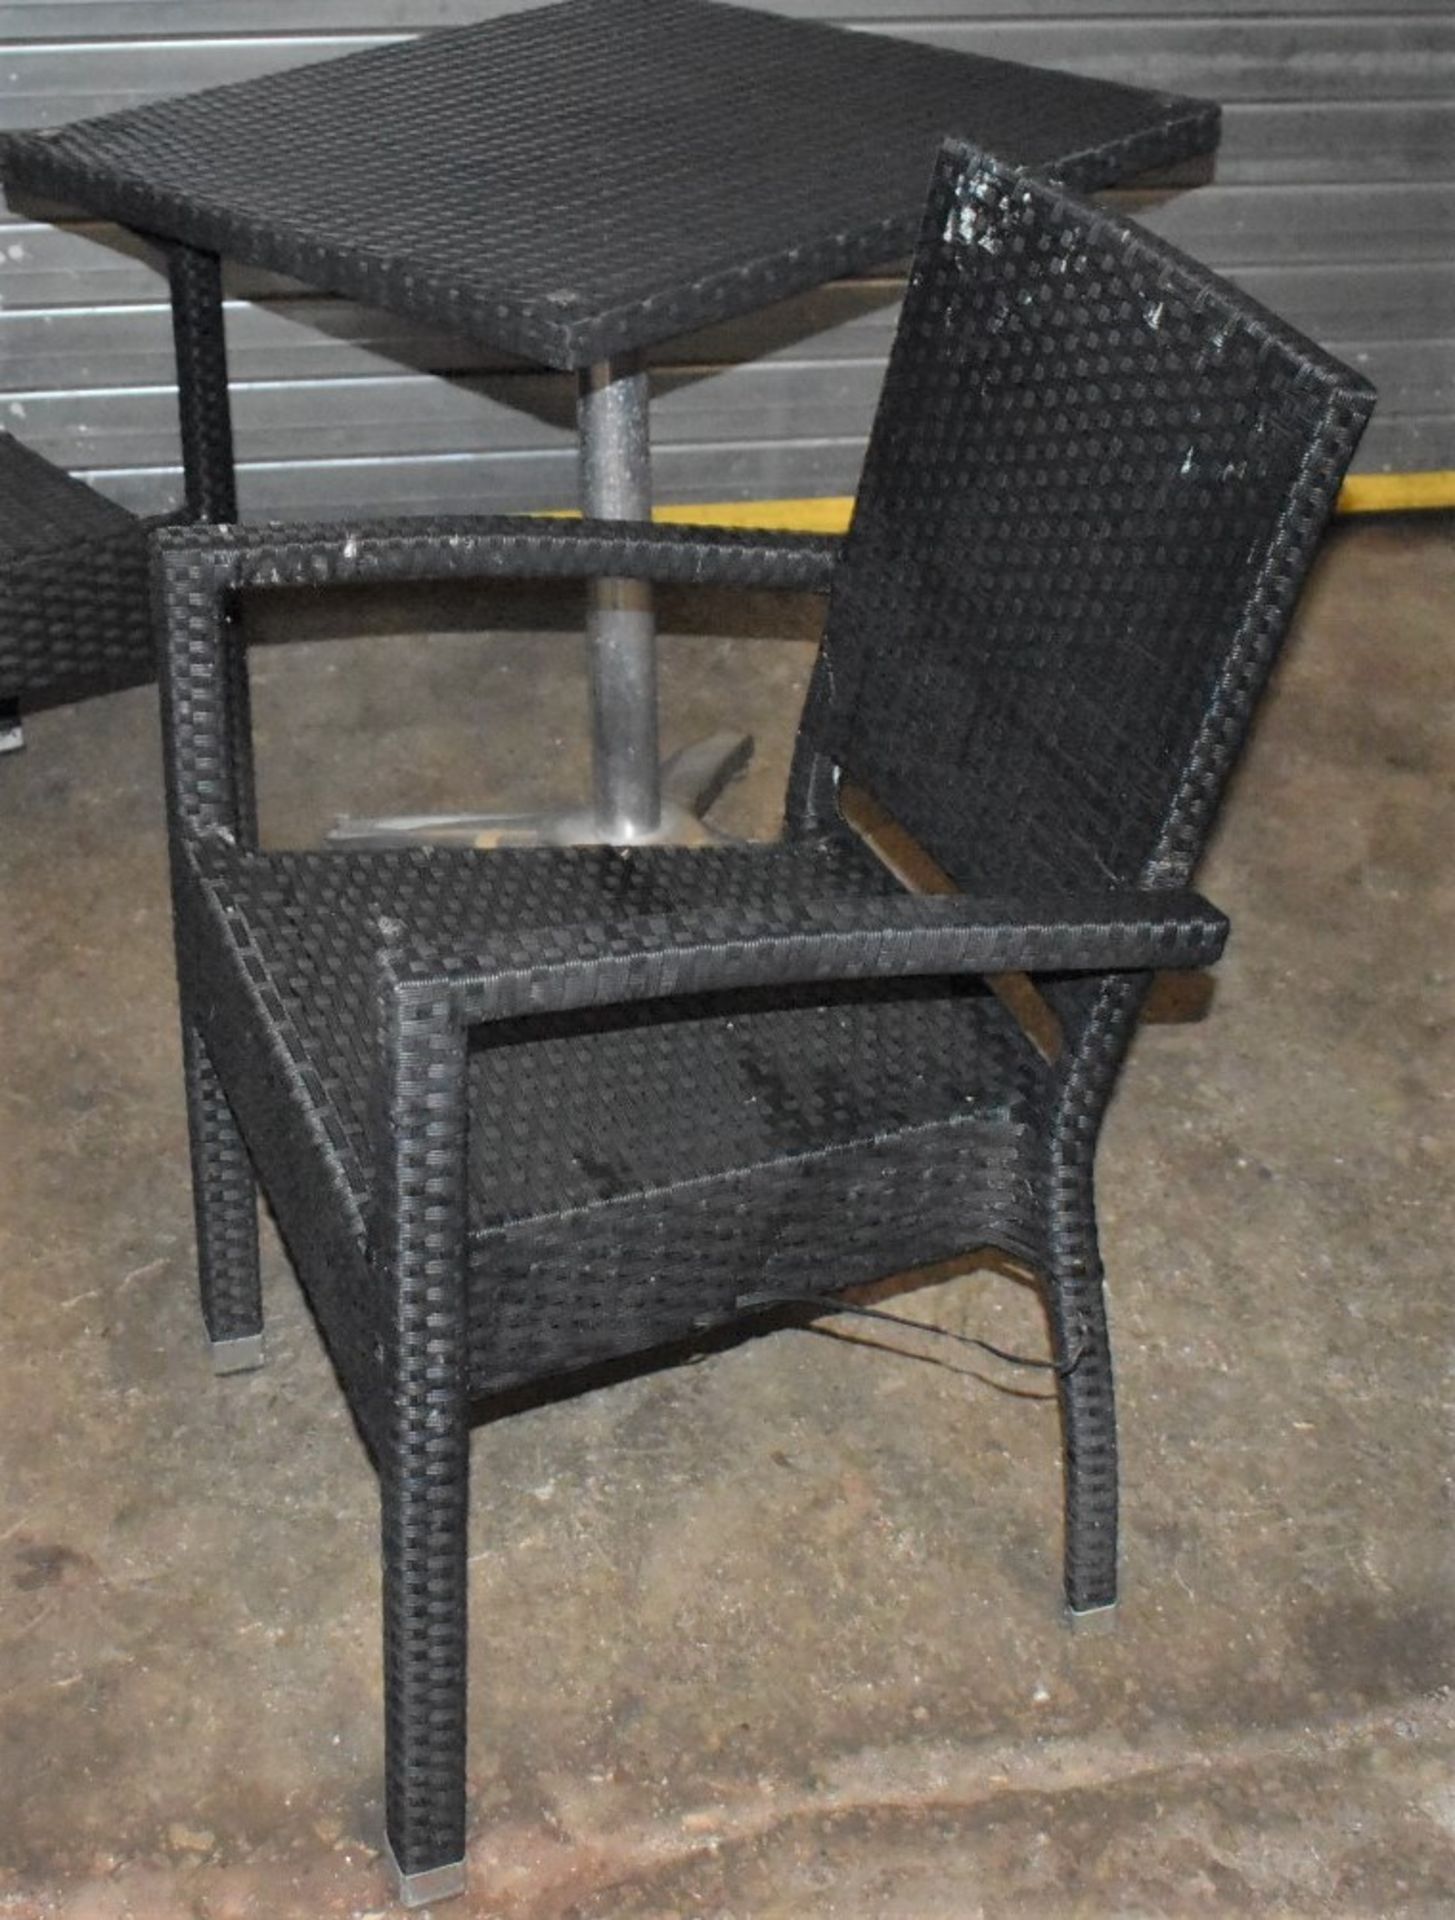 2 x Outdoor Stackable Rattan Chairs With Arm Rests and 1 x Square Outdoor Table - CL999 - Ref - Image 5 of 5